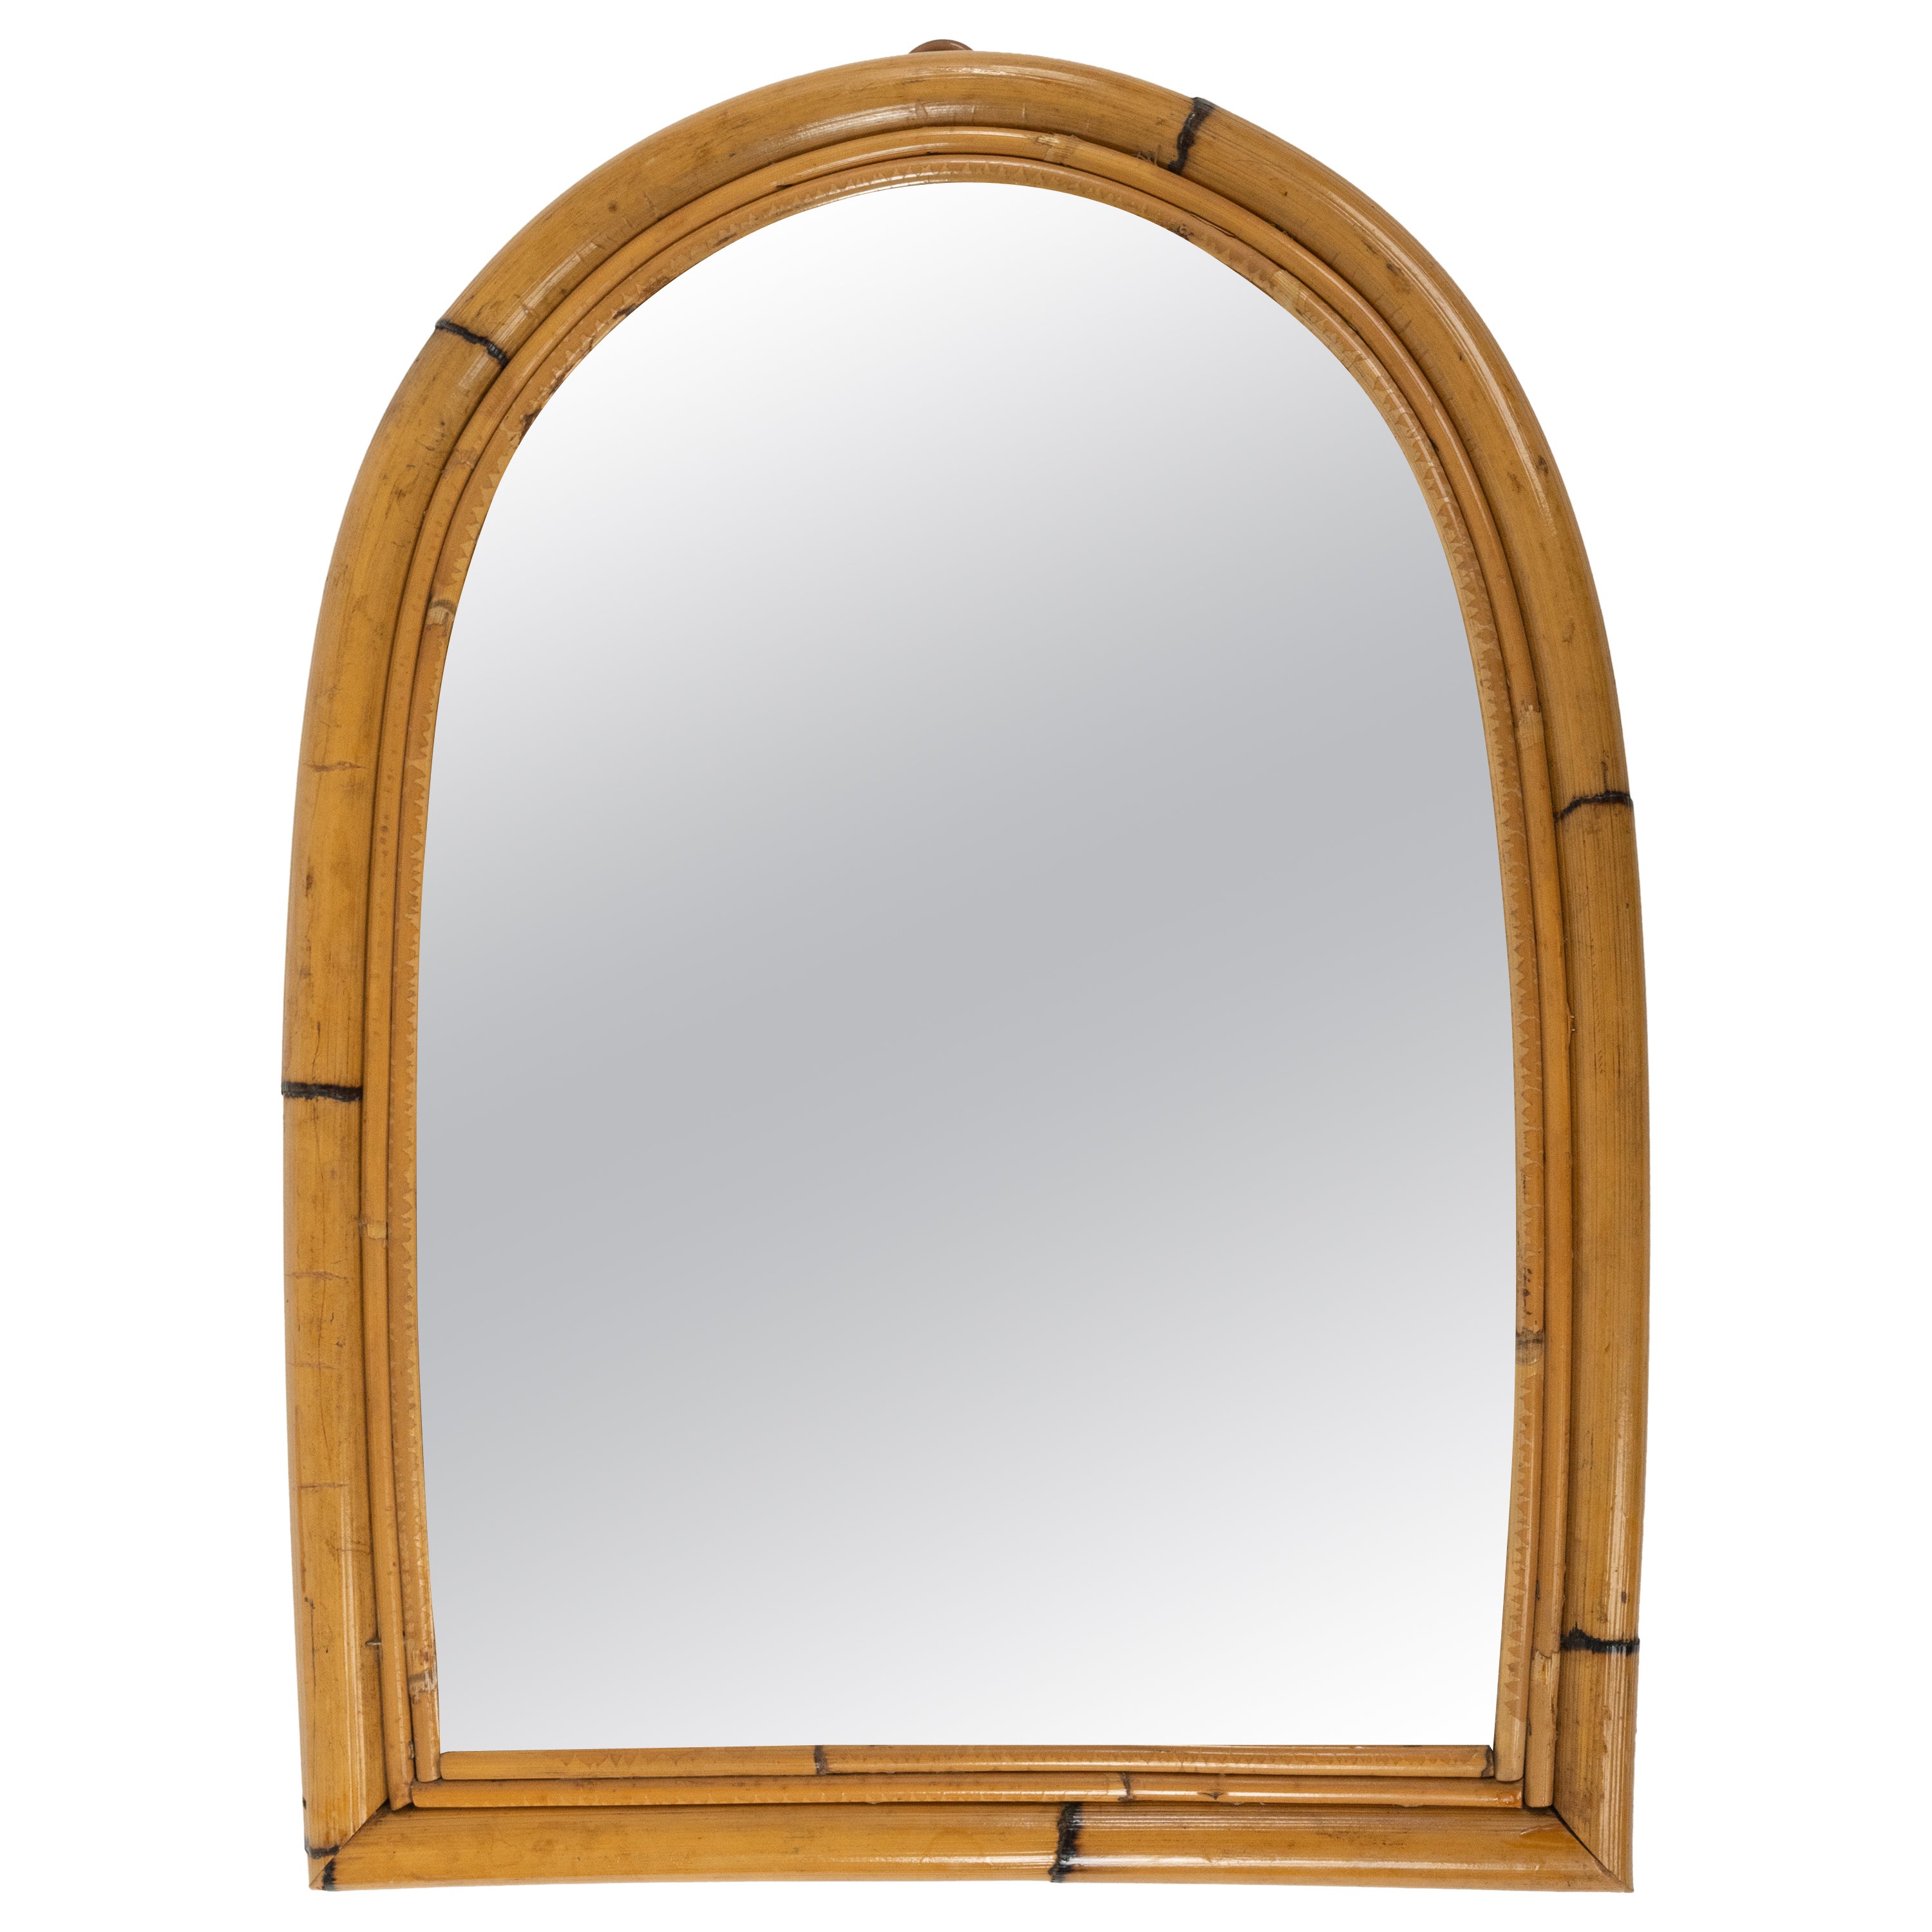 Midcentury Rattan and Bamboo Arched Wall Mirror, Italy 1960s For Sale